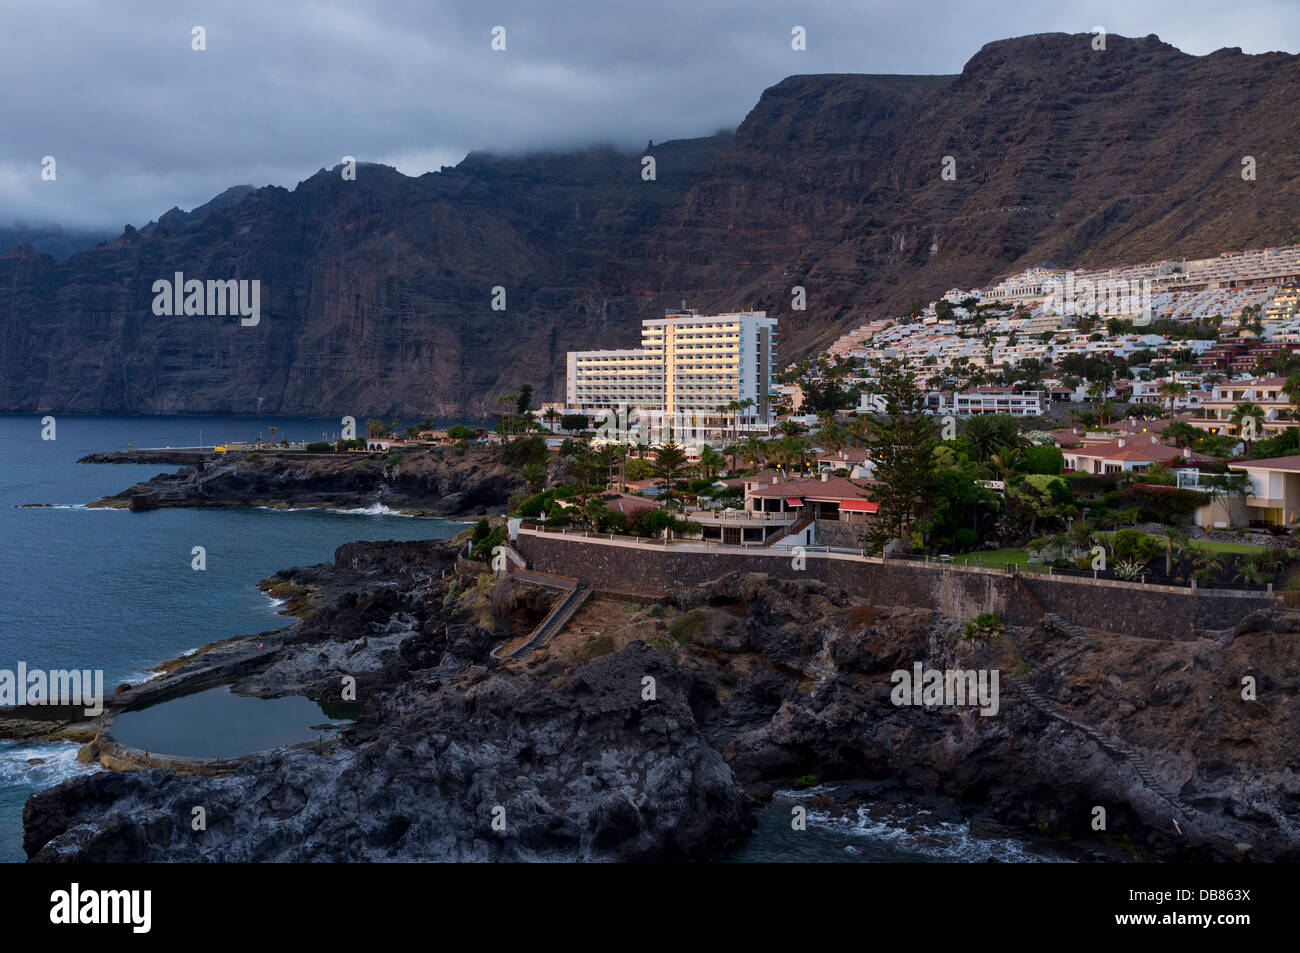 Los Gigantes cliffs, village, and coastline at dusk on a overcast summer day with deep rich colours reflecting the low light, Stock Photo